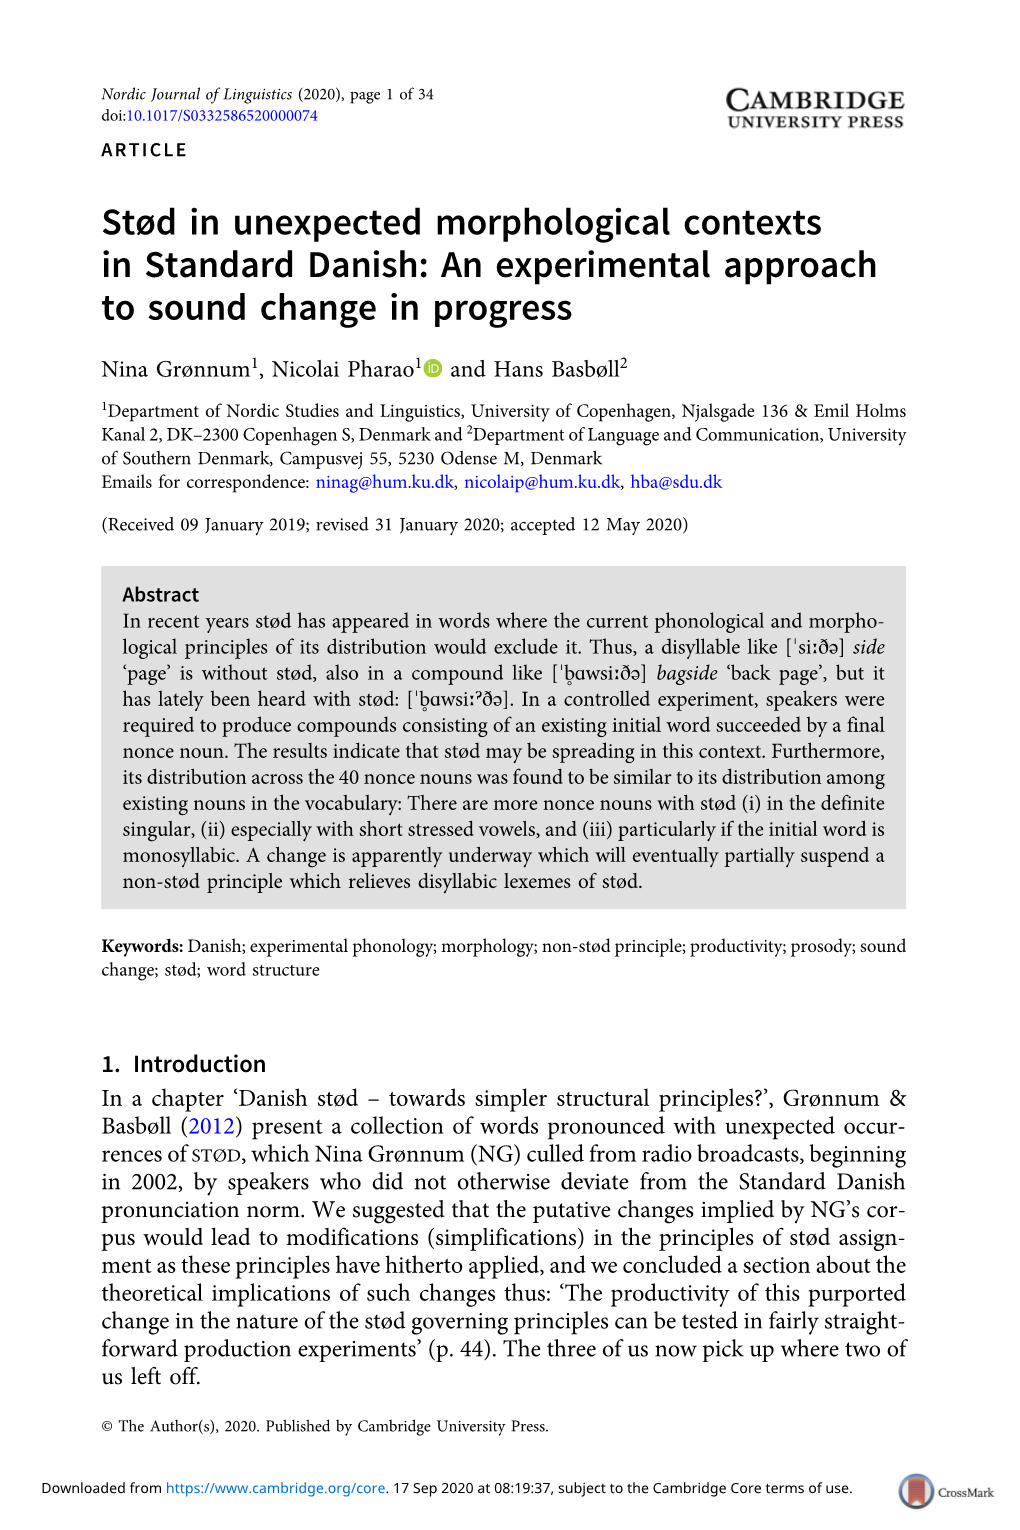 Stød in Unexpected Morphological Contexts in Standard Danish: an Experimental Approach to Sound Change in Progress